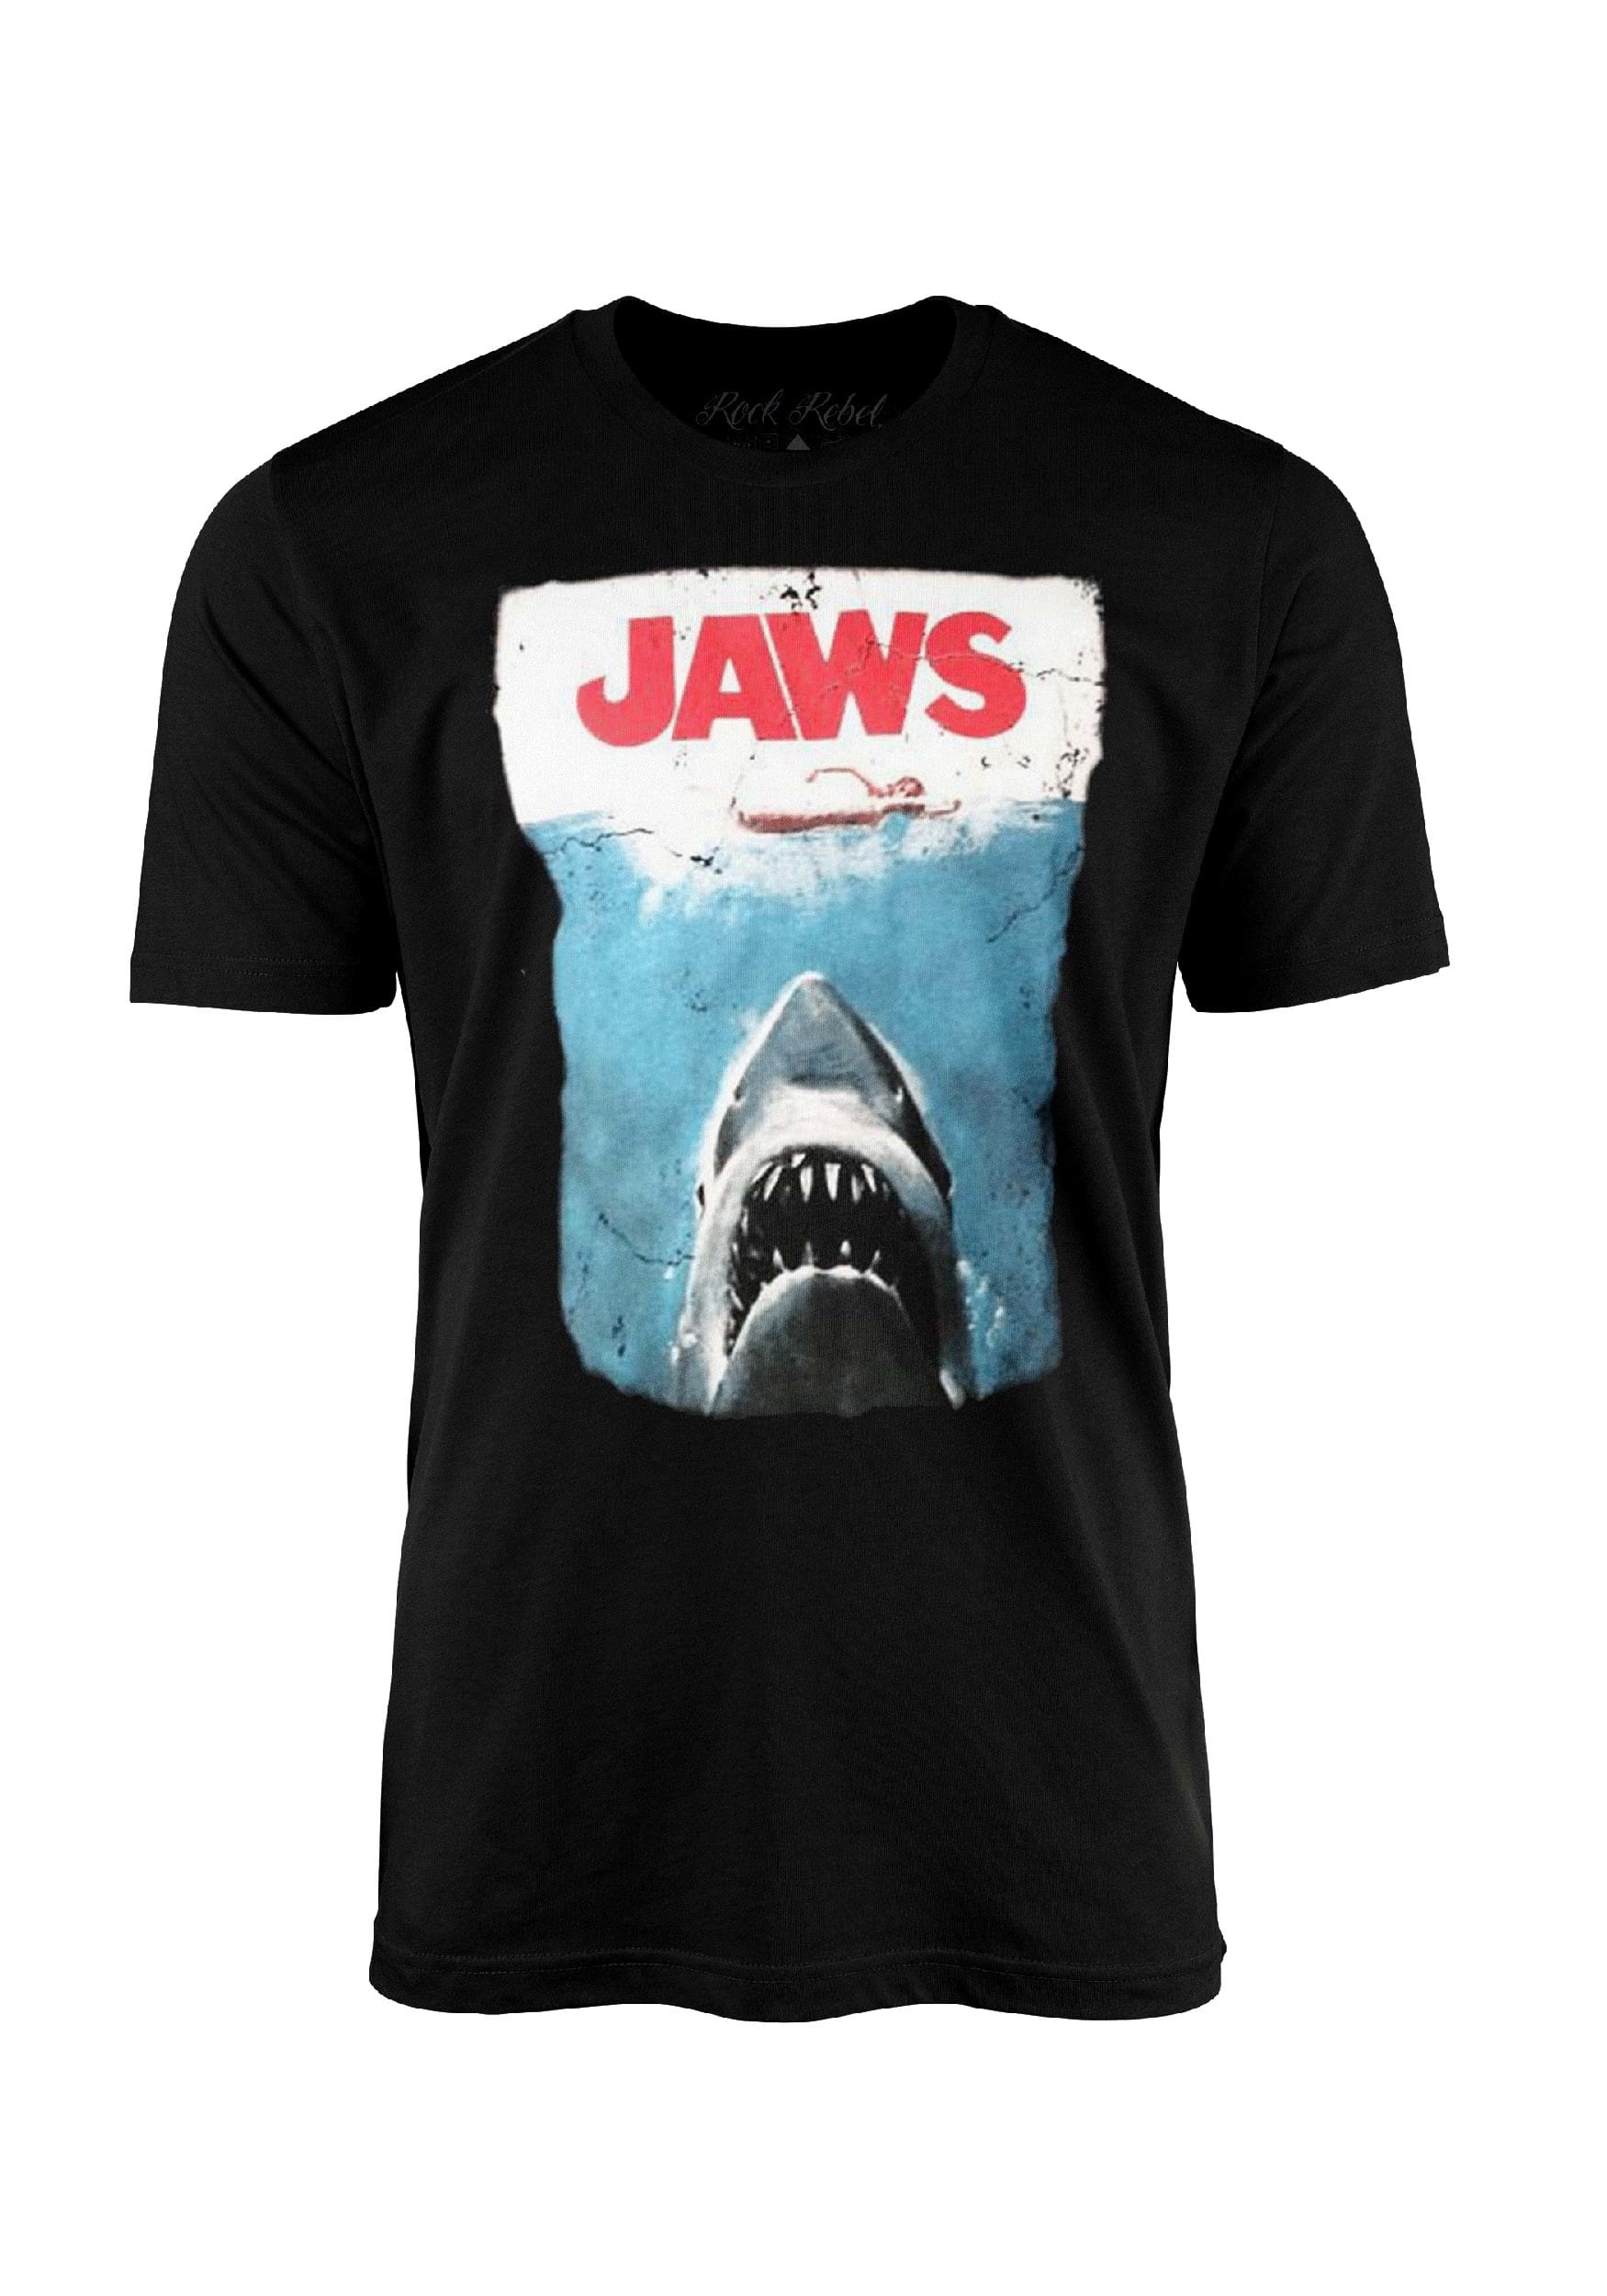 Jaws Movie Poster Graphic T-shirt